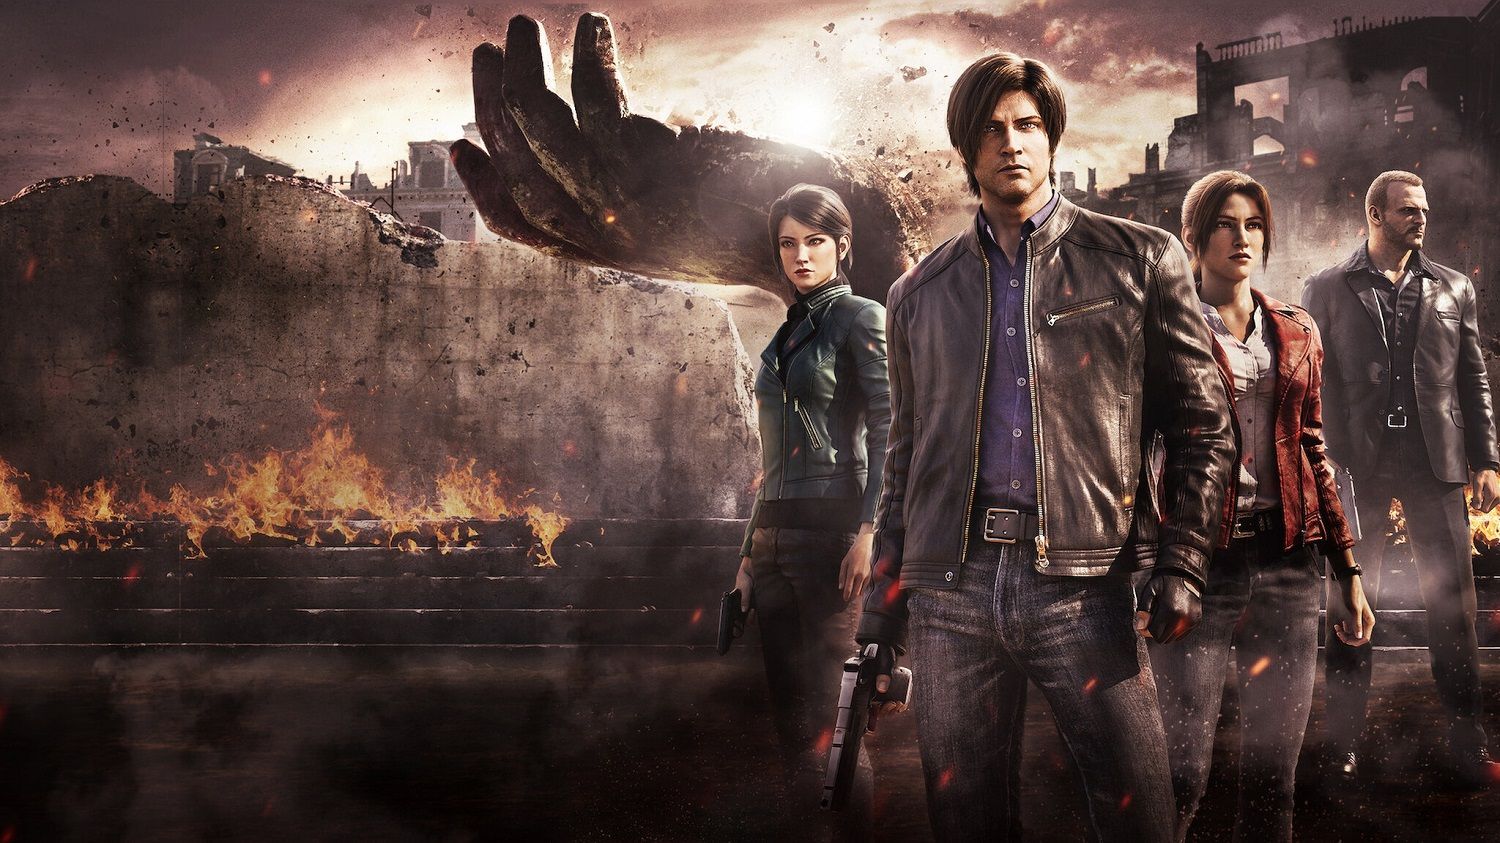 Resident Evil TV series to debut following final movie